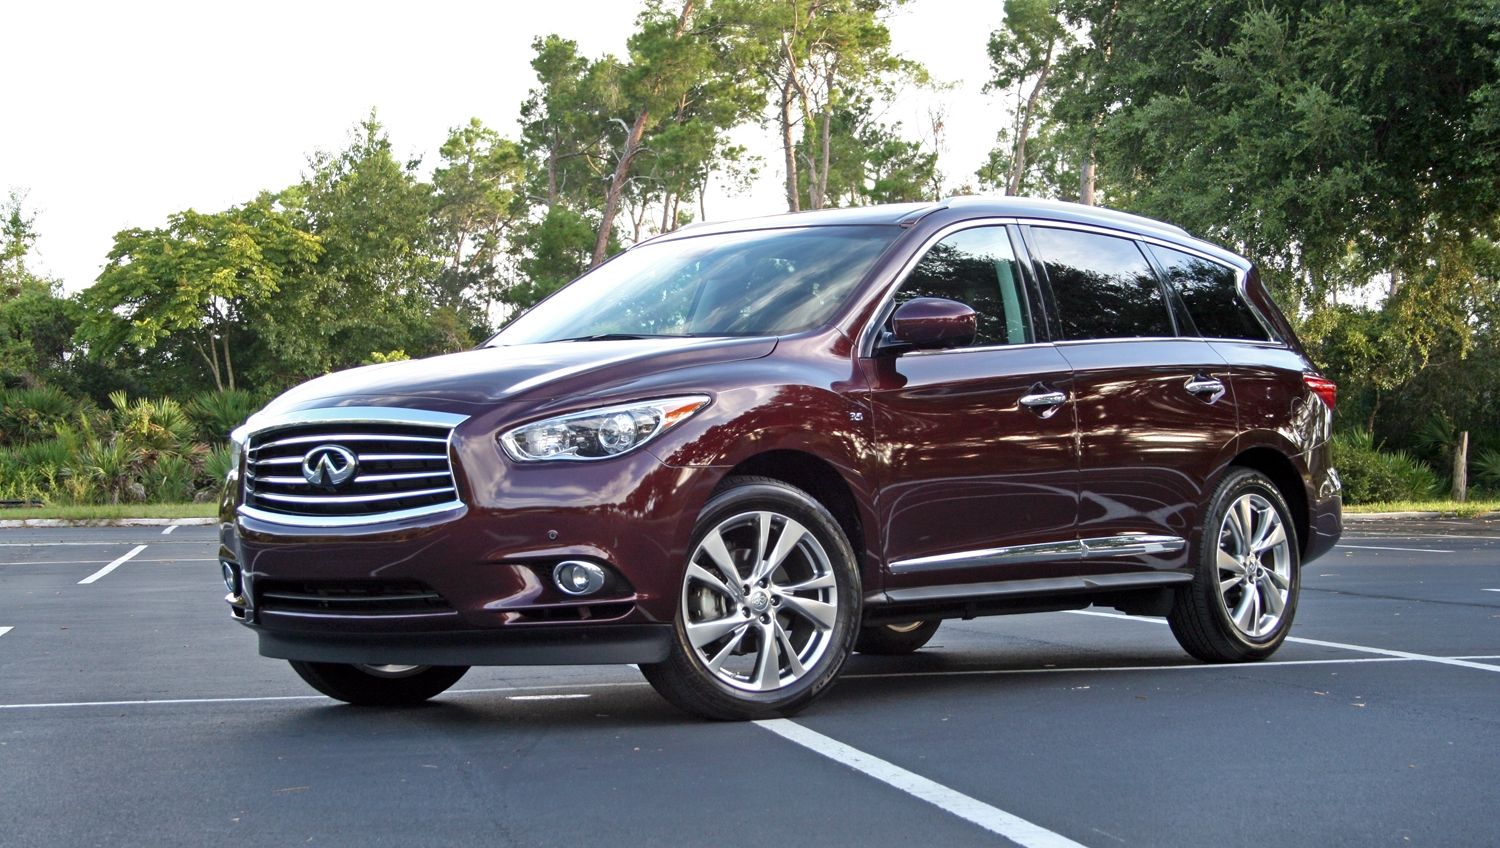  Mark spent some time with the Infiniti QX60, find out what he thinks of it here, 